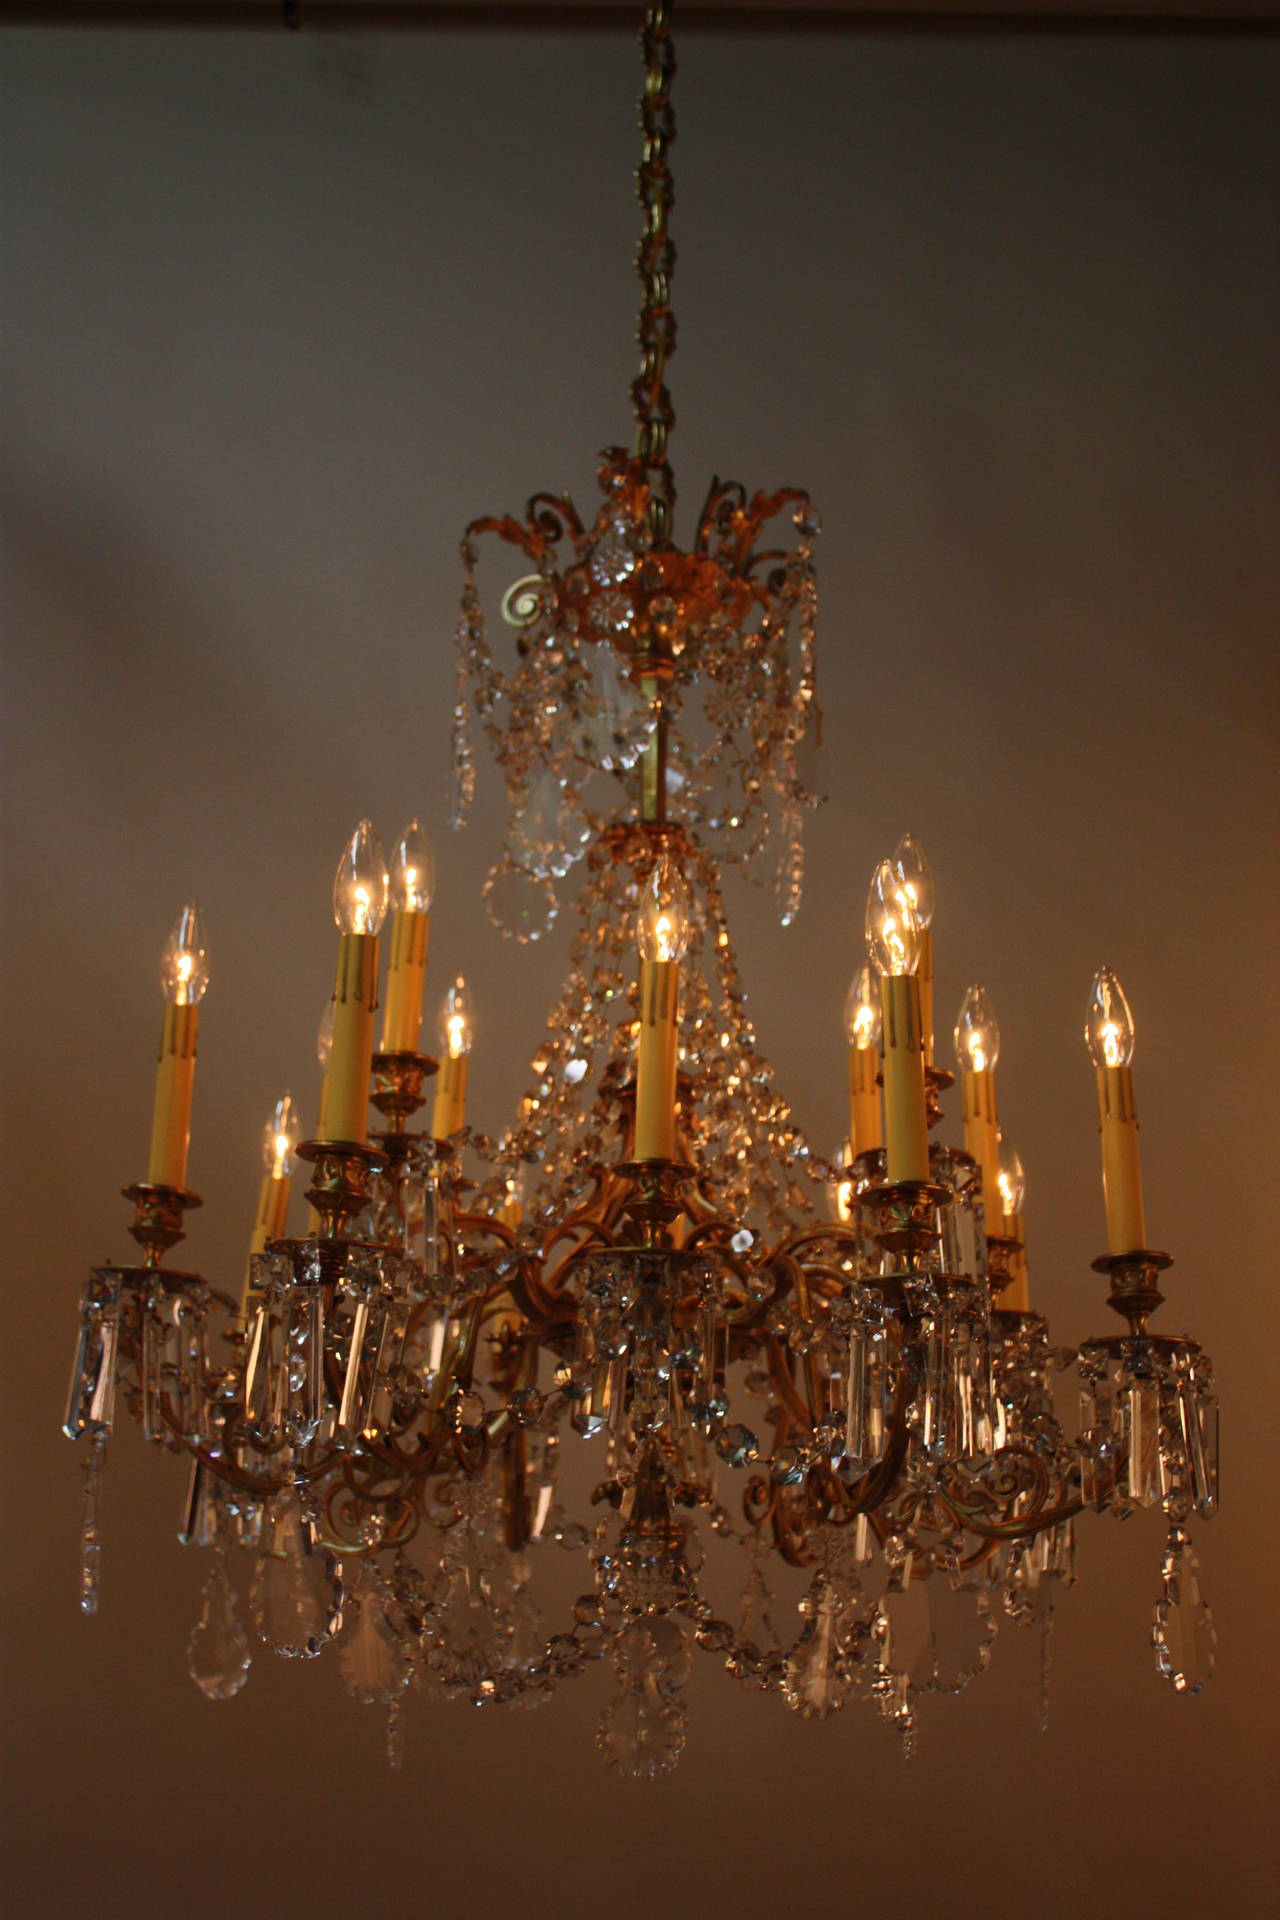 This stunning 19th century chandelier from France is made of beautiful bronze and crystal. With sixteen lights, this fixture is the definition of elegance.